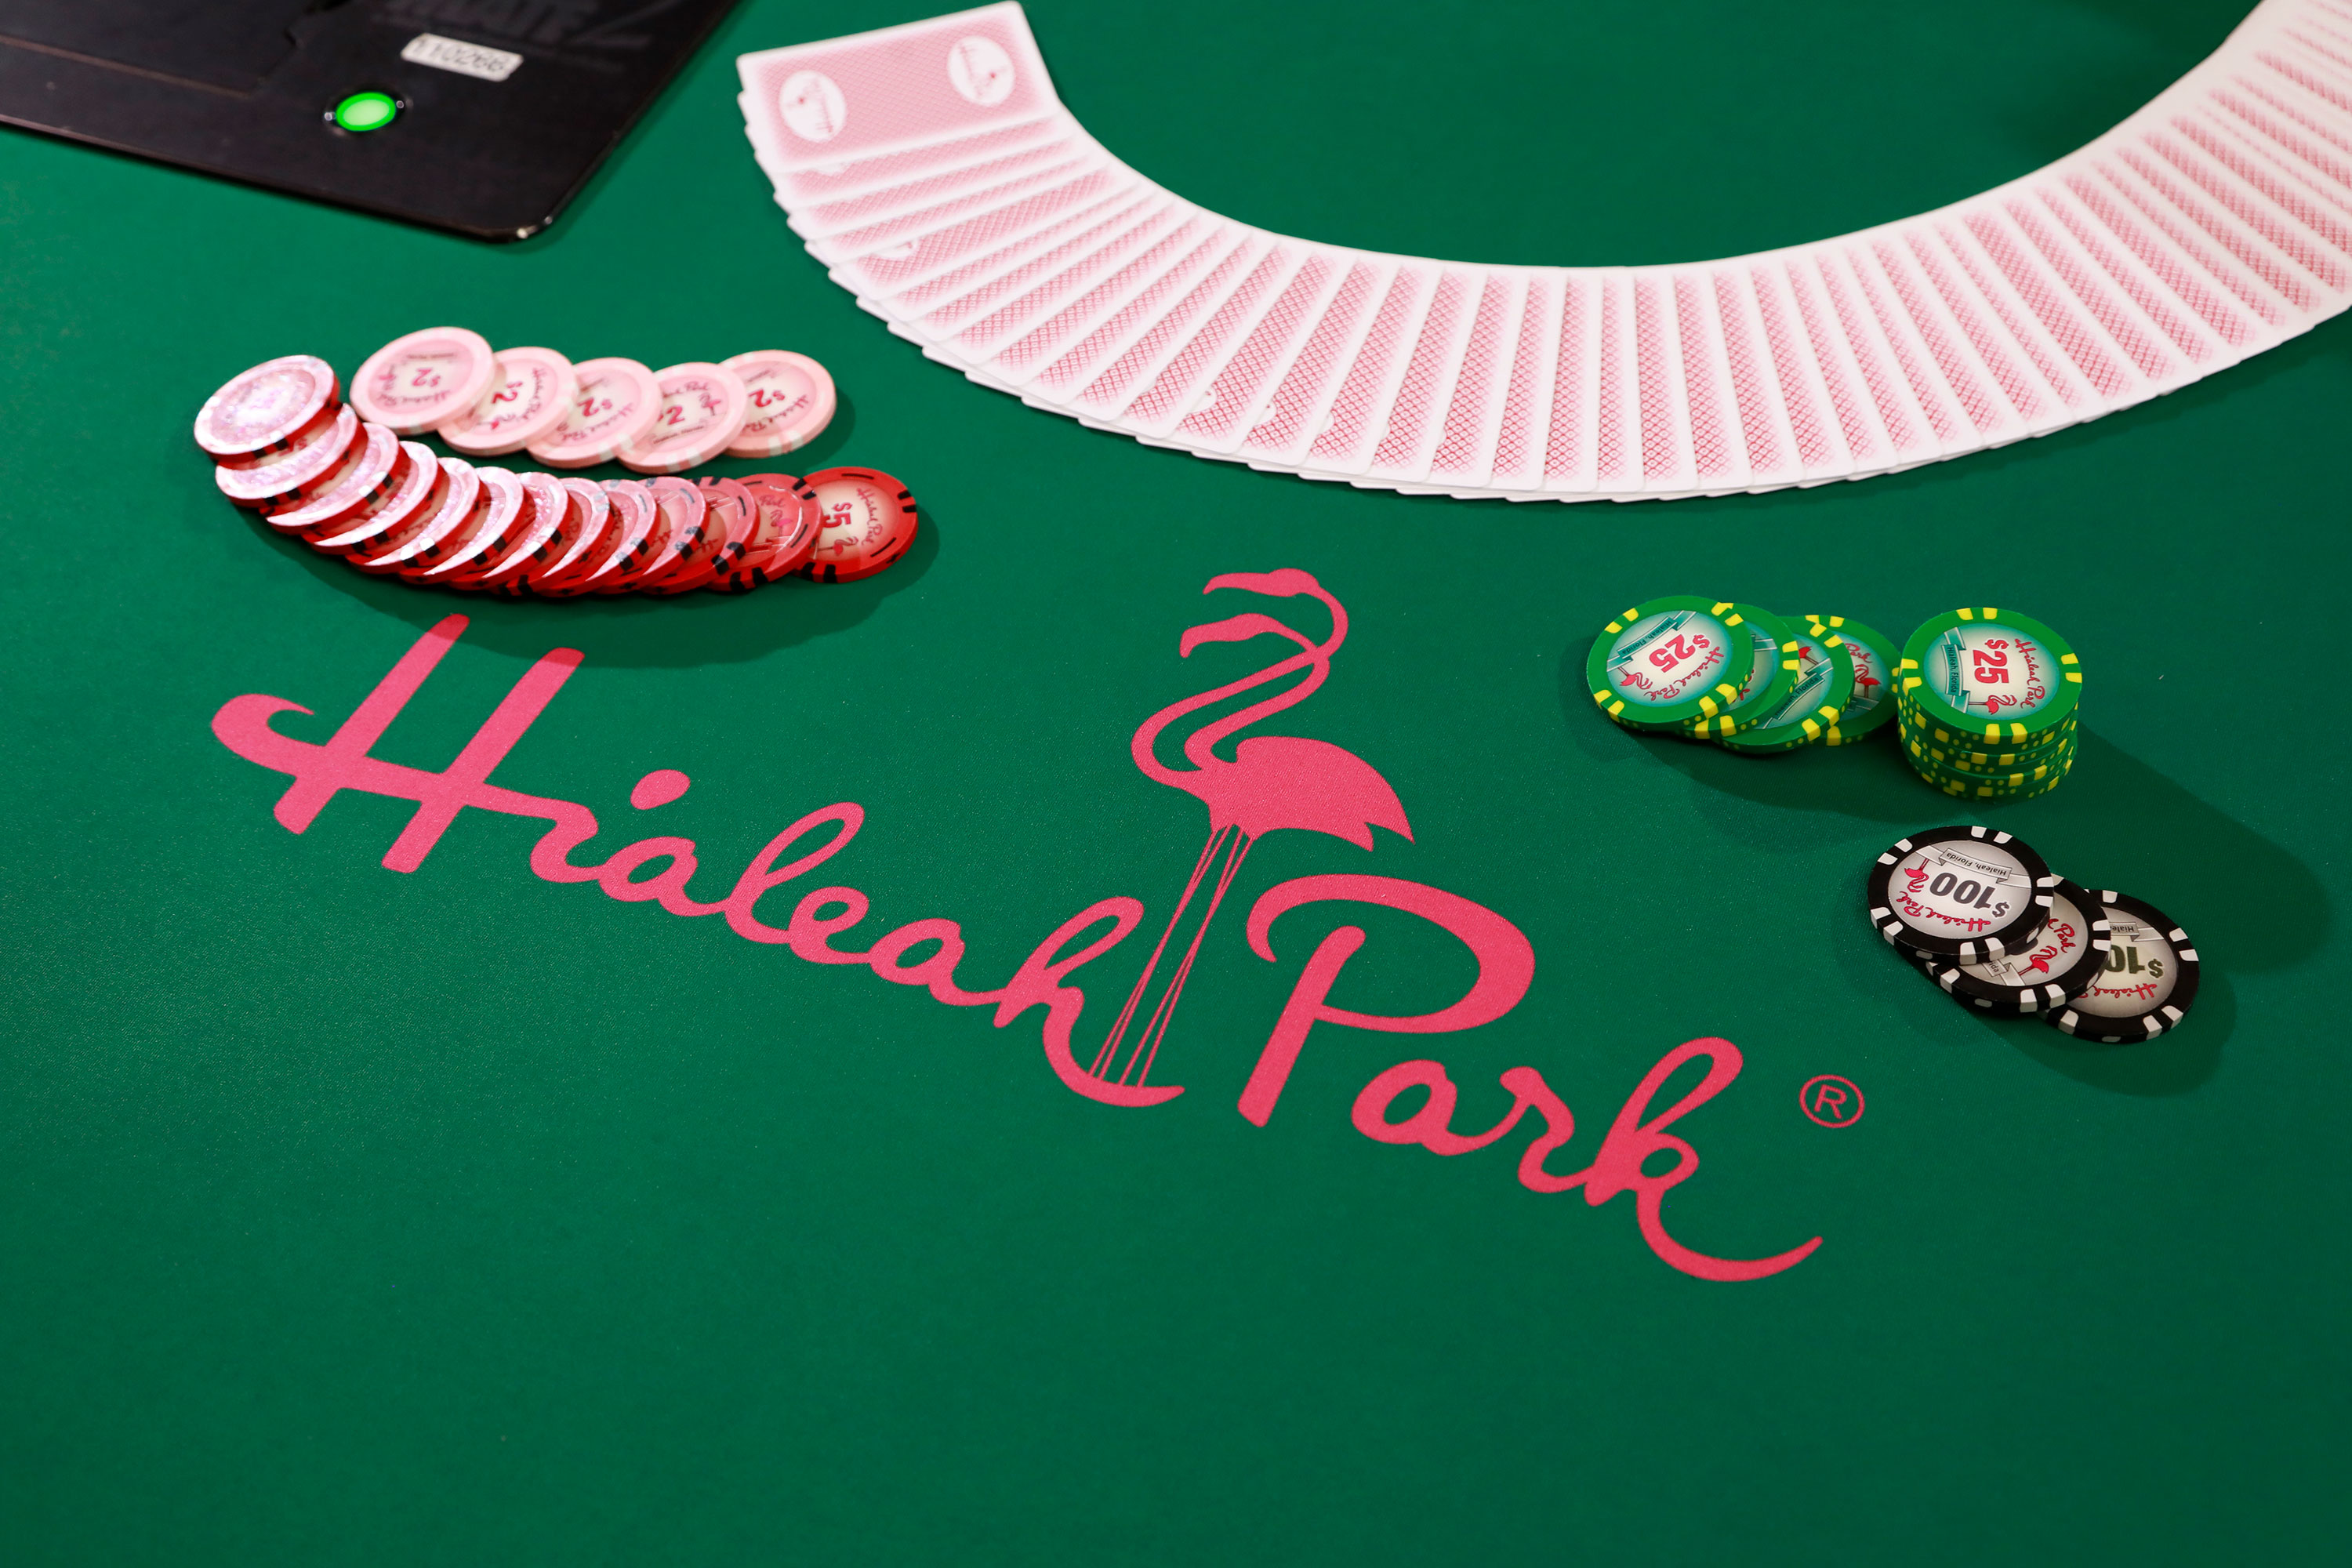 Poker table with playing cards and chips